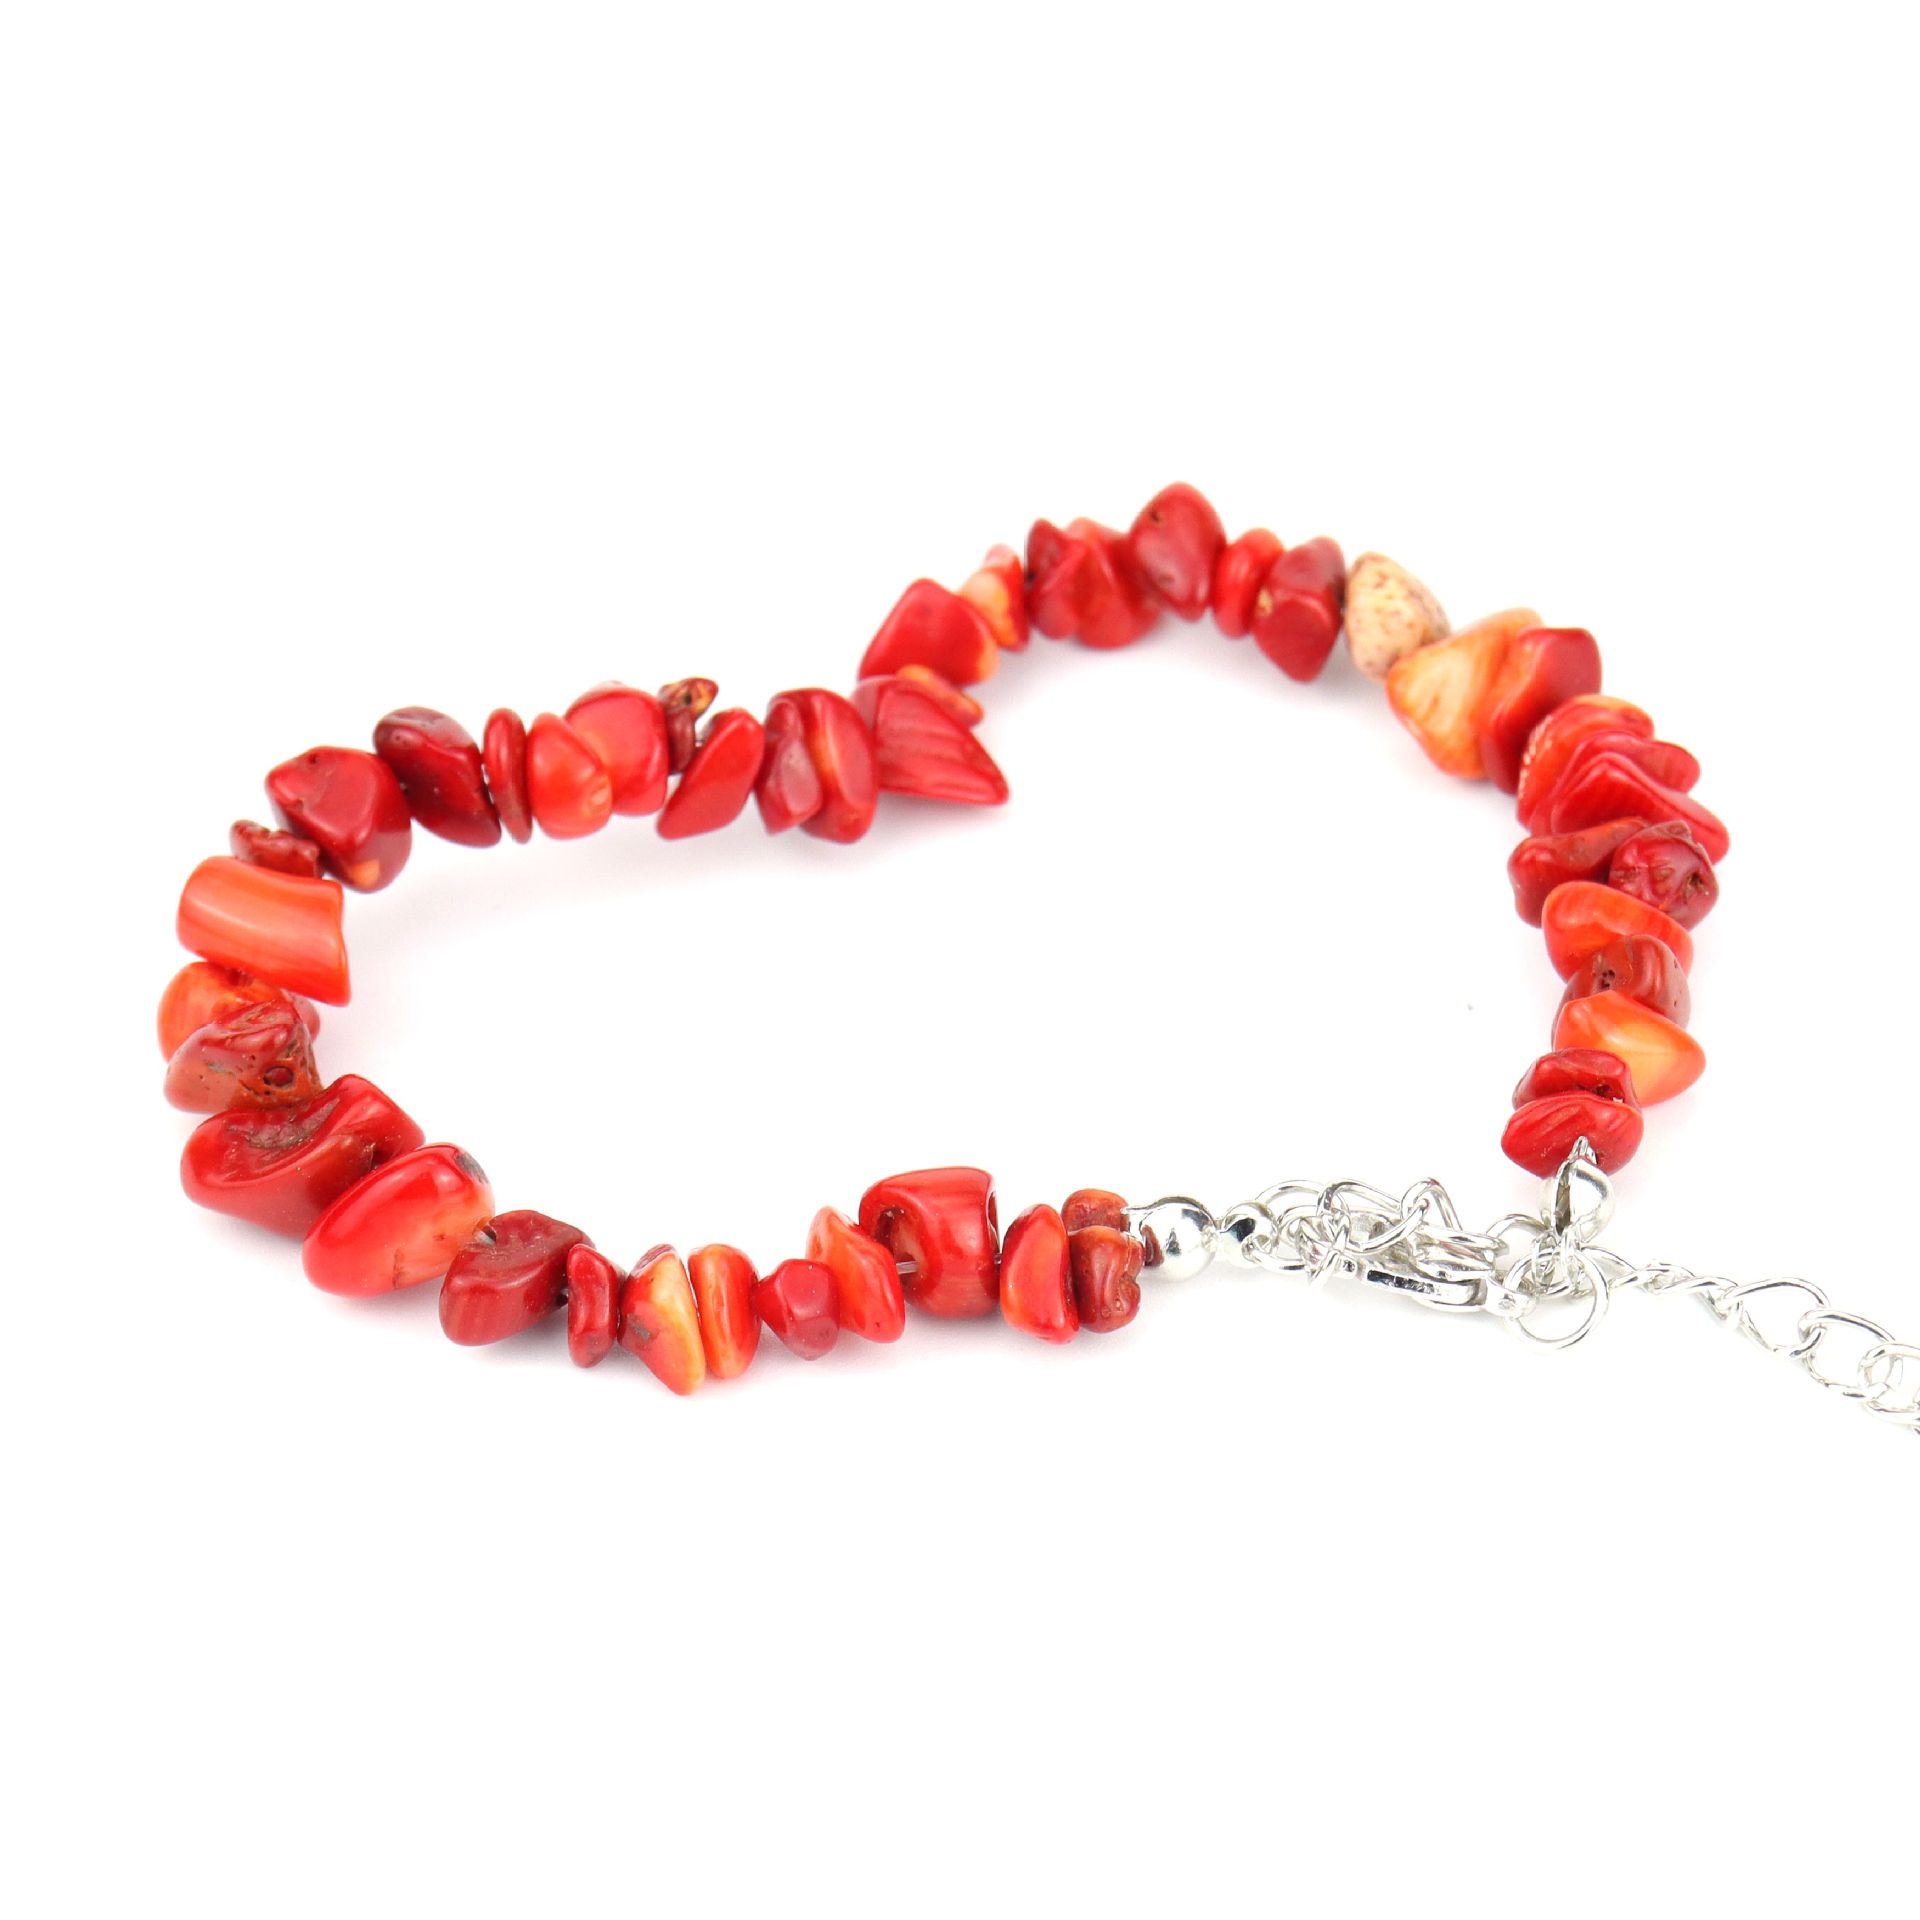 6 Dark Red Coral